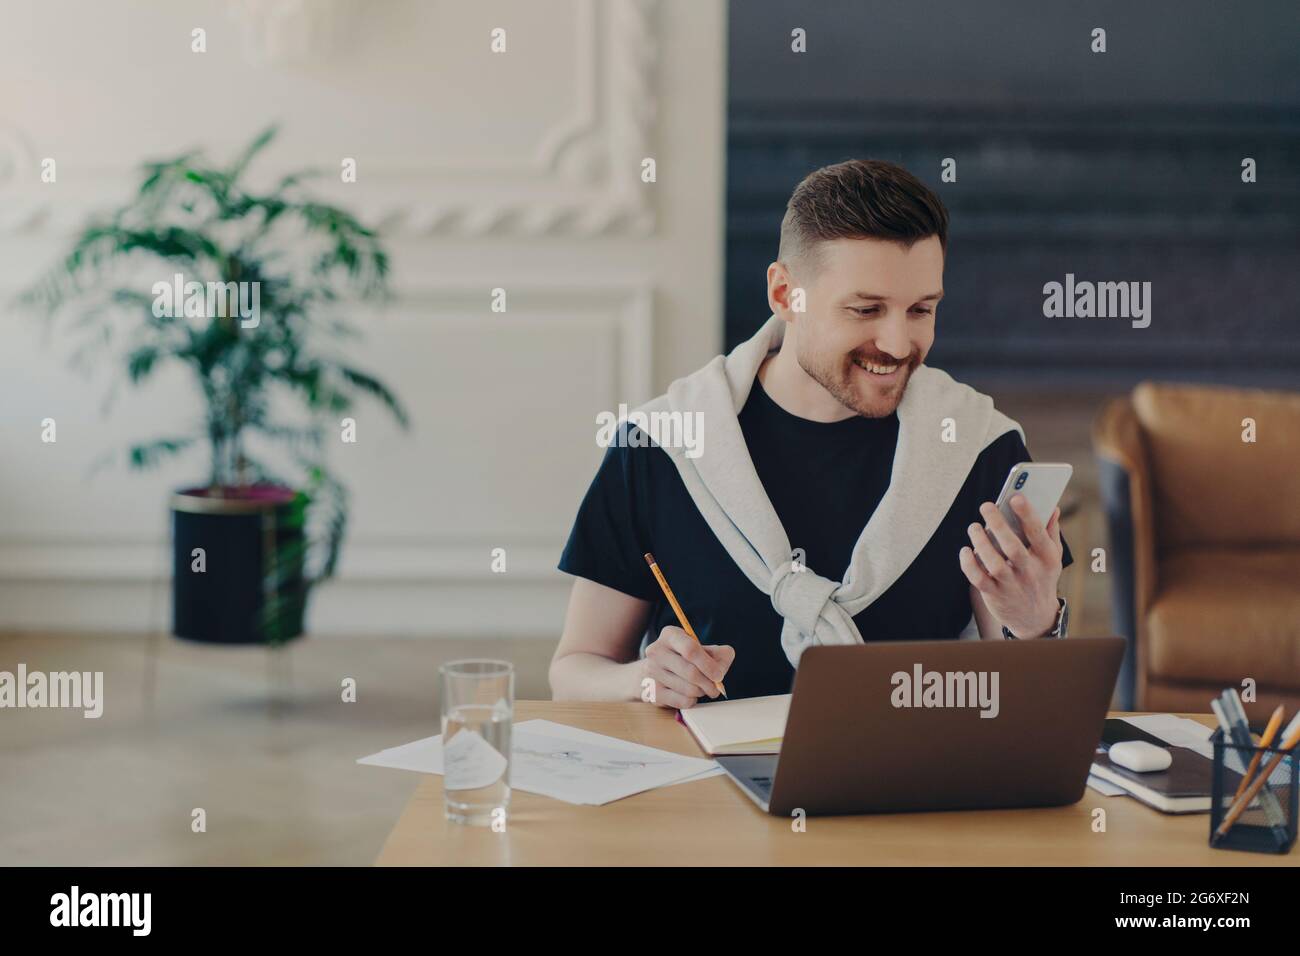 Happy bearded young man studies indoor with modern gadgets writes down notes from internet website makes records in notebook holds smartphone poses at Stock Photo